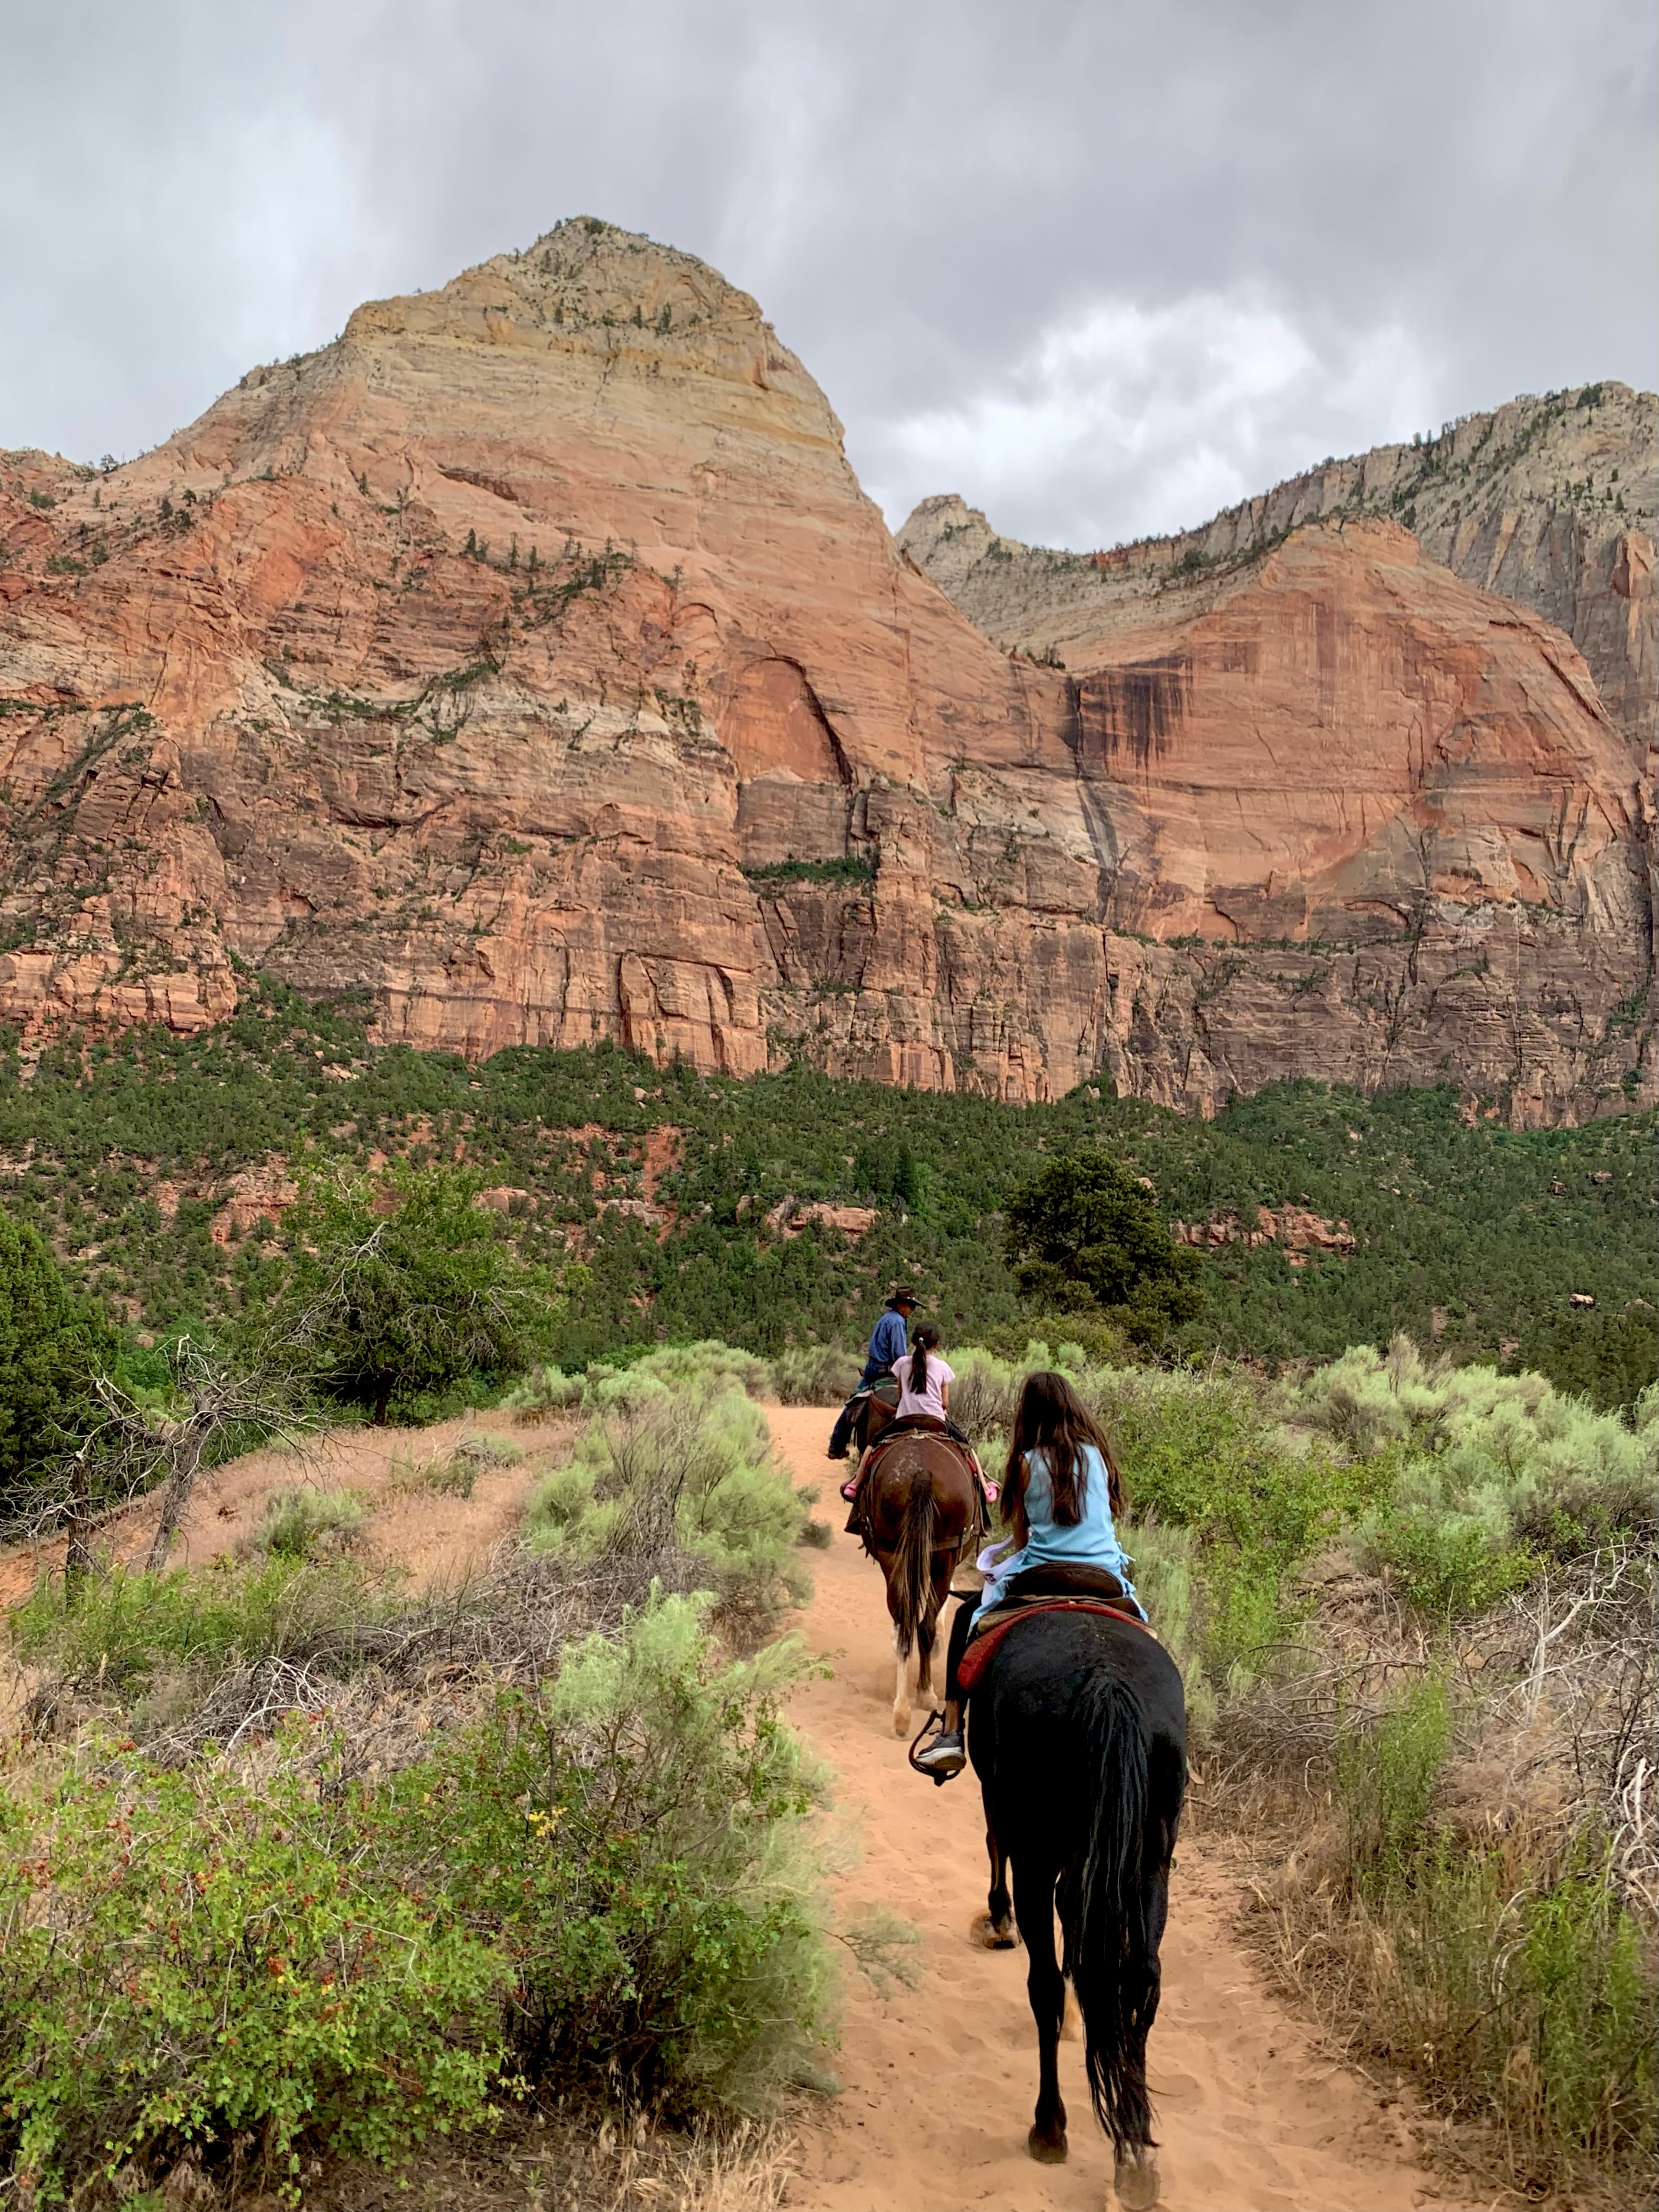 People riding horses in Zion national park